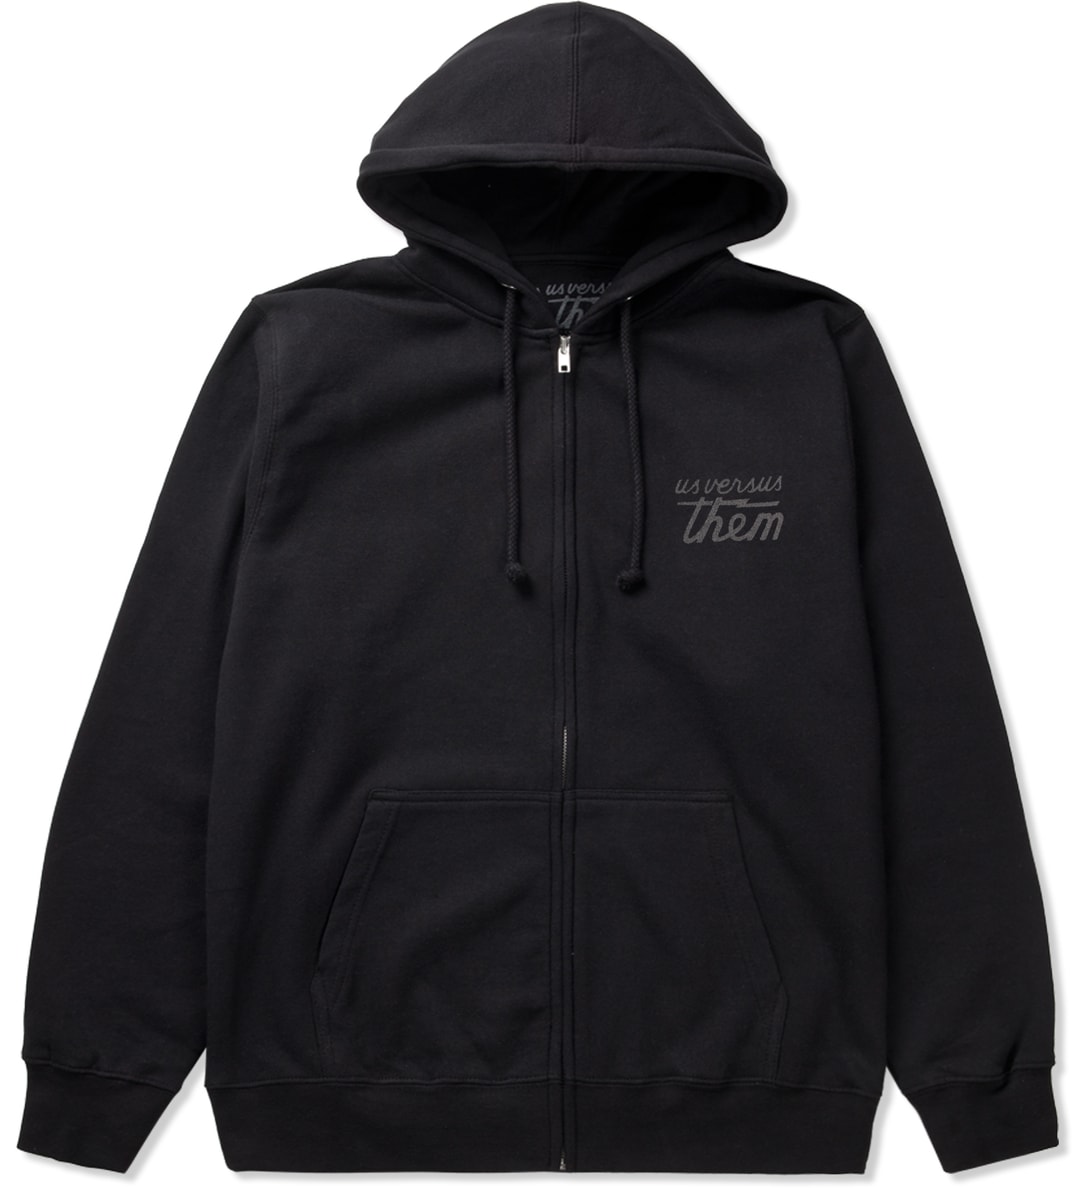 Us Versus Them - Black Reflection Eternal Zip Hoodie  HBX - Globally  Curated Fashion and Lifestyle by Hypebeast